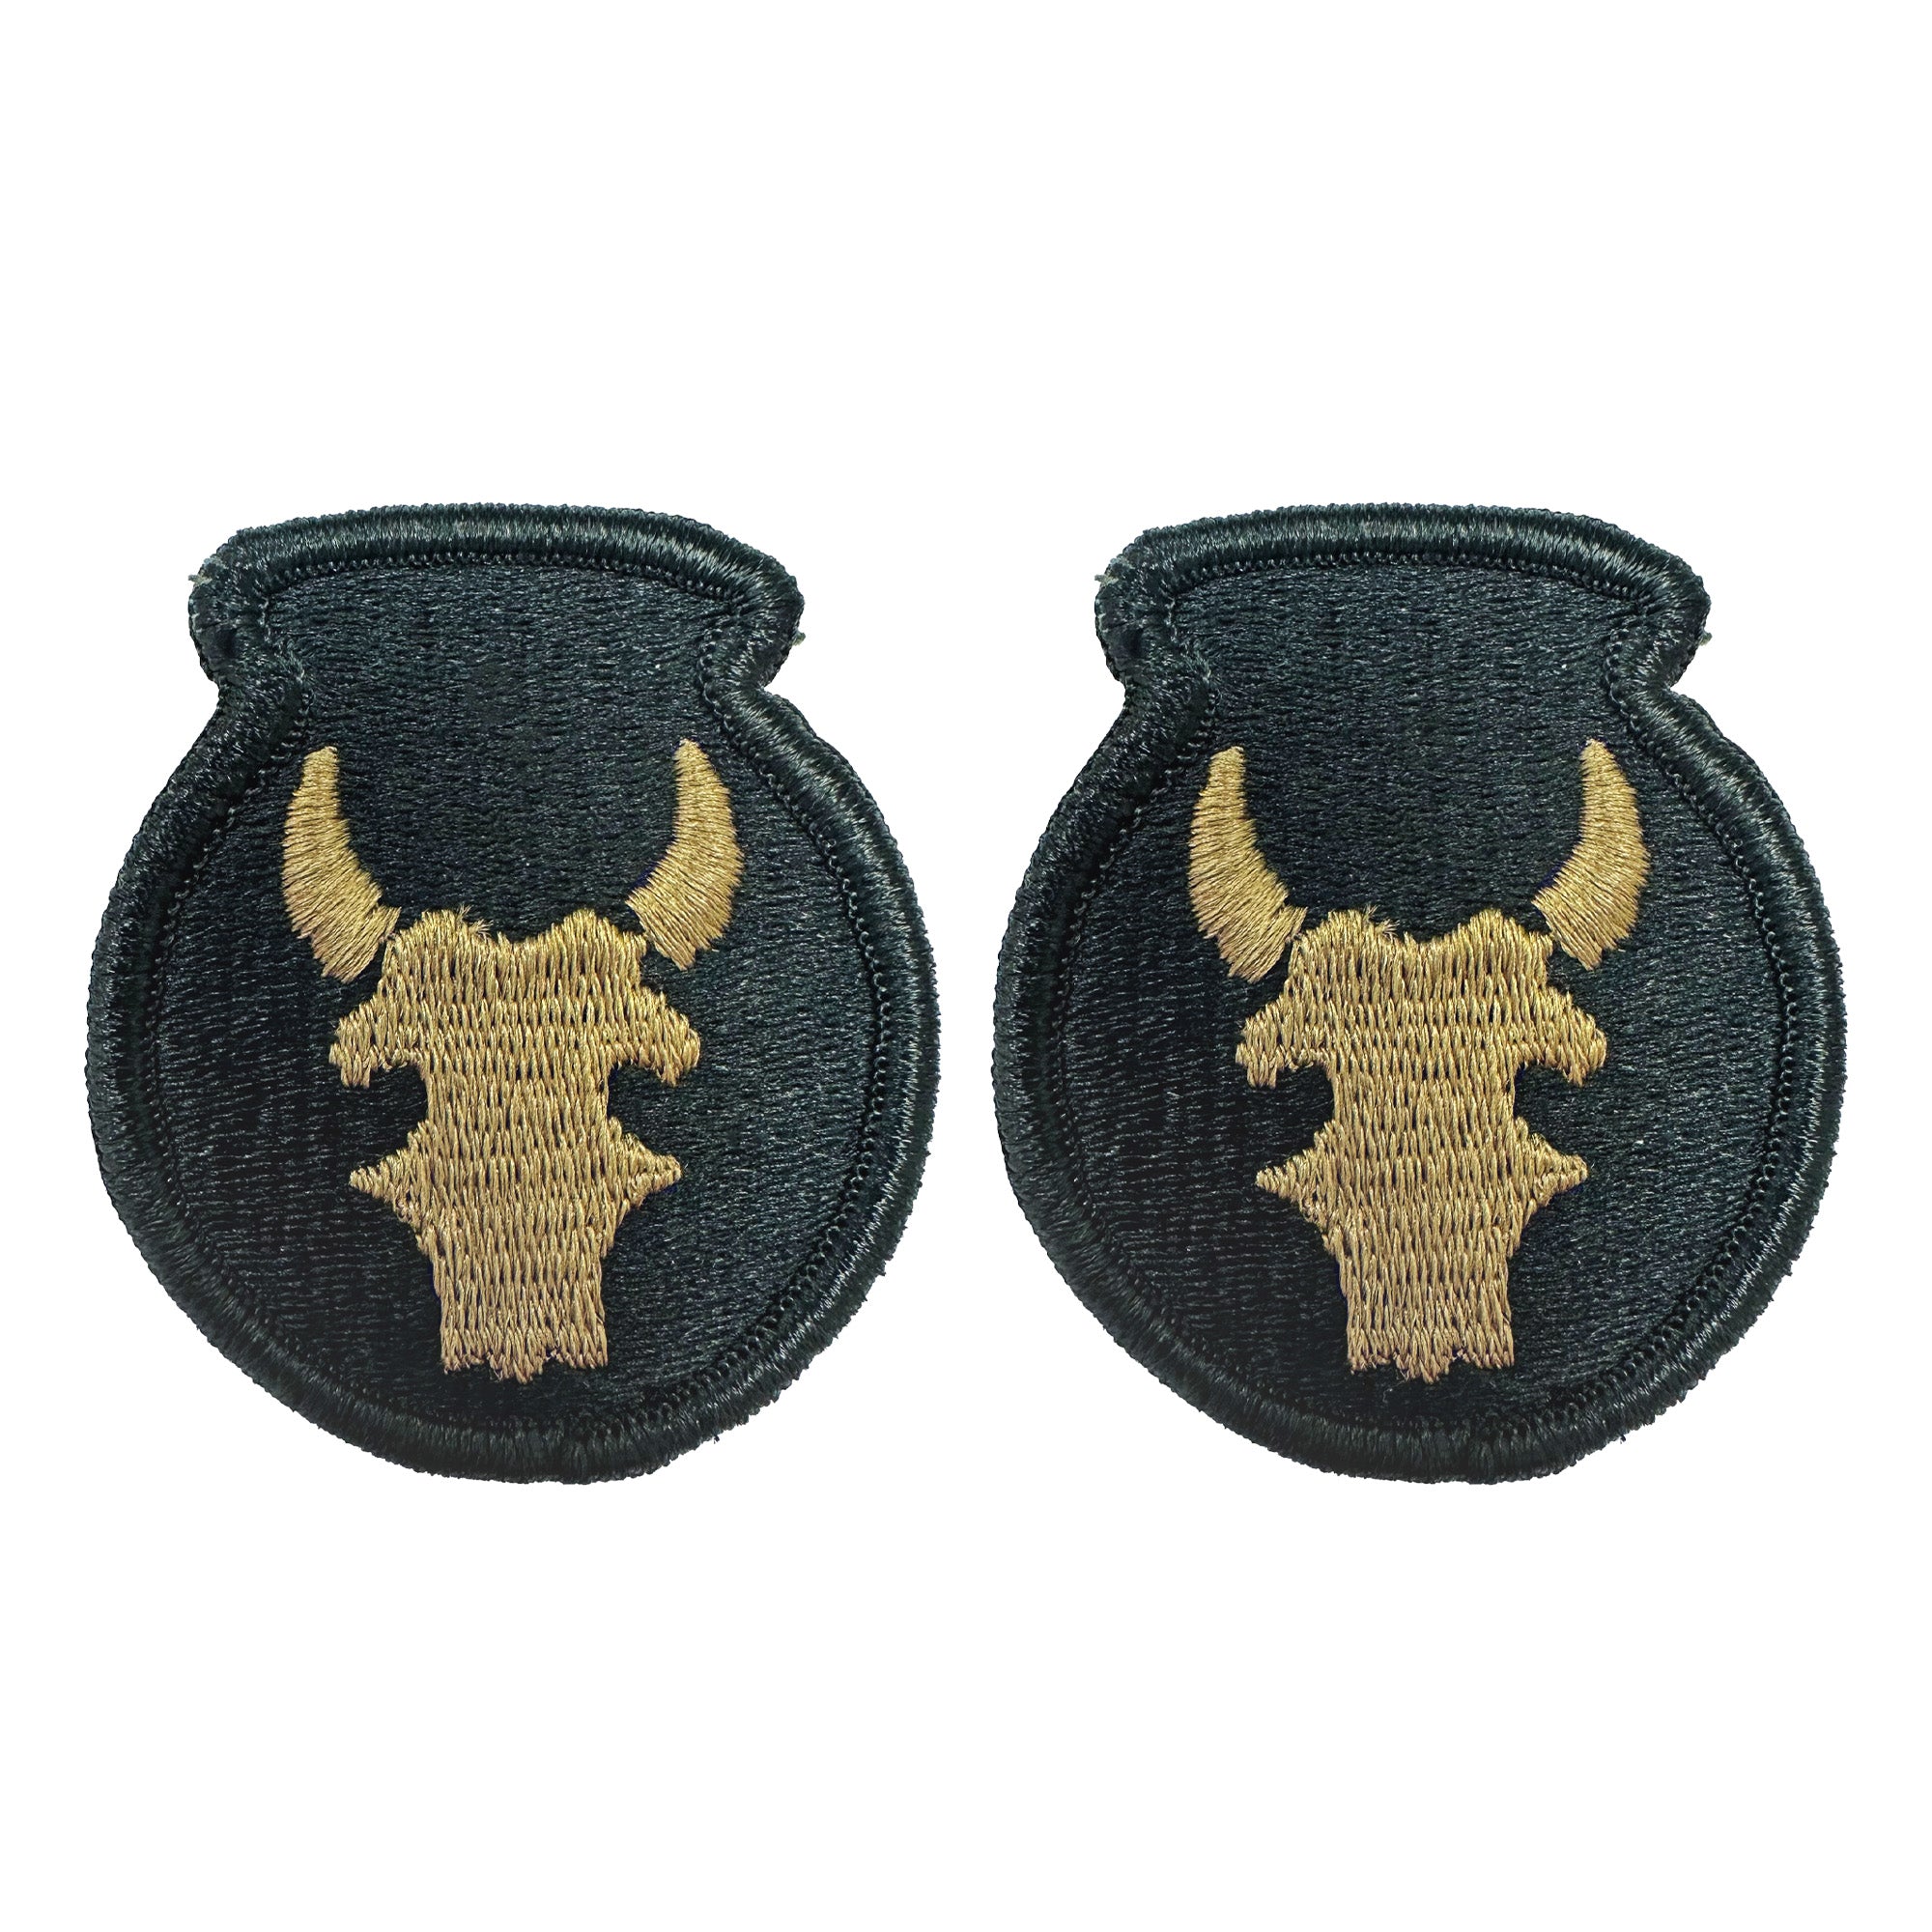 34th Infantry Division OCP Patch with Hook Fastener (pair) - Insignia Depot